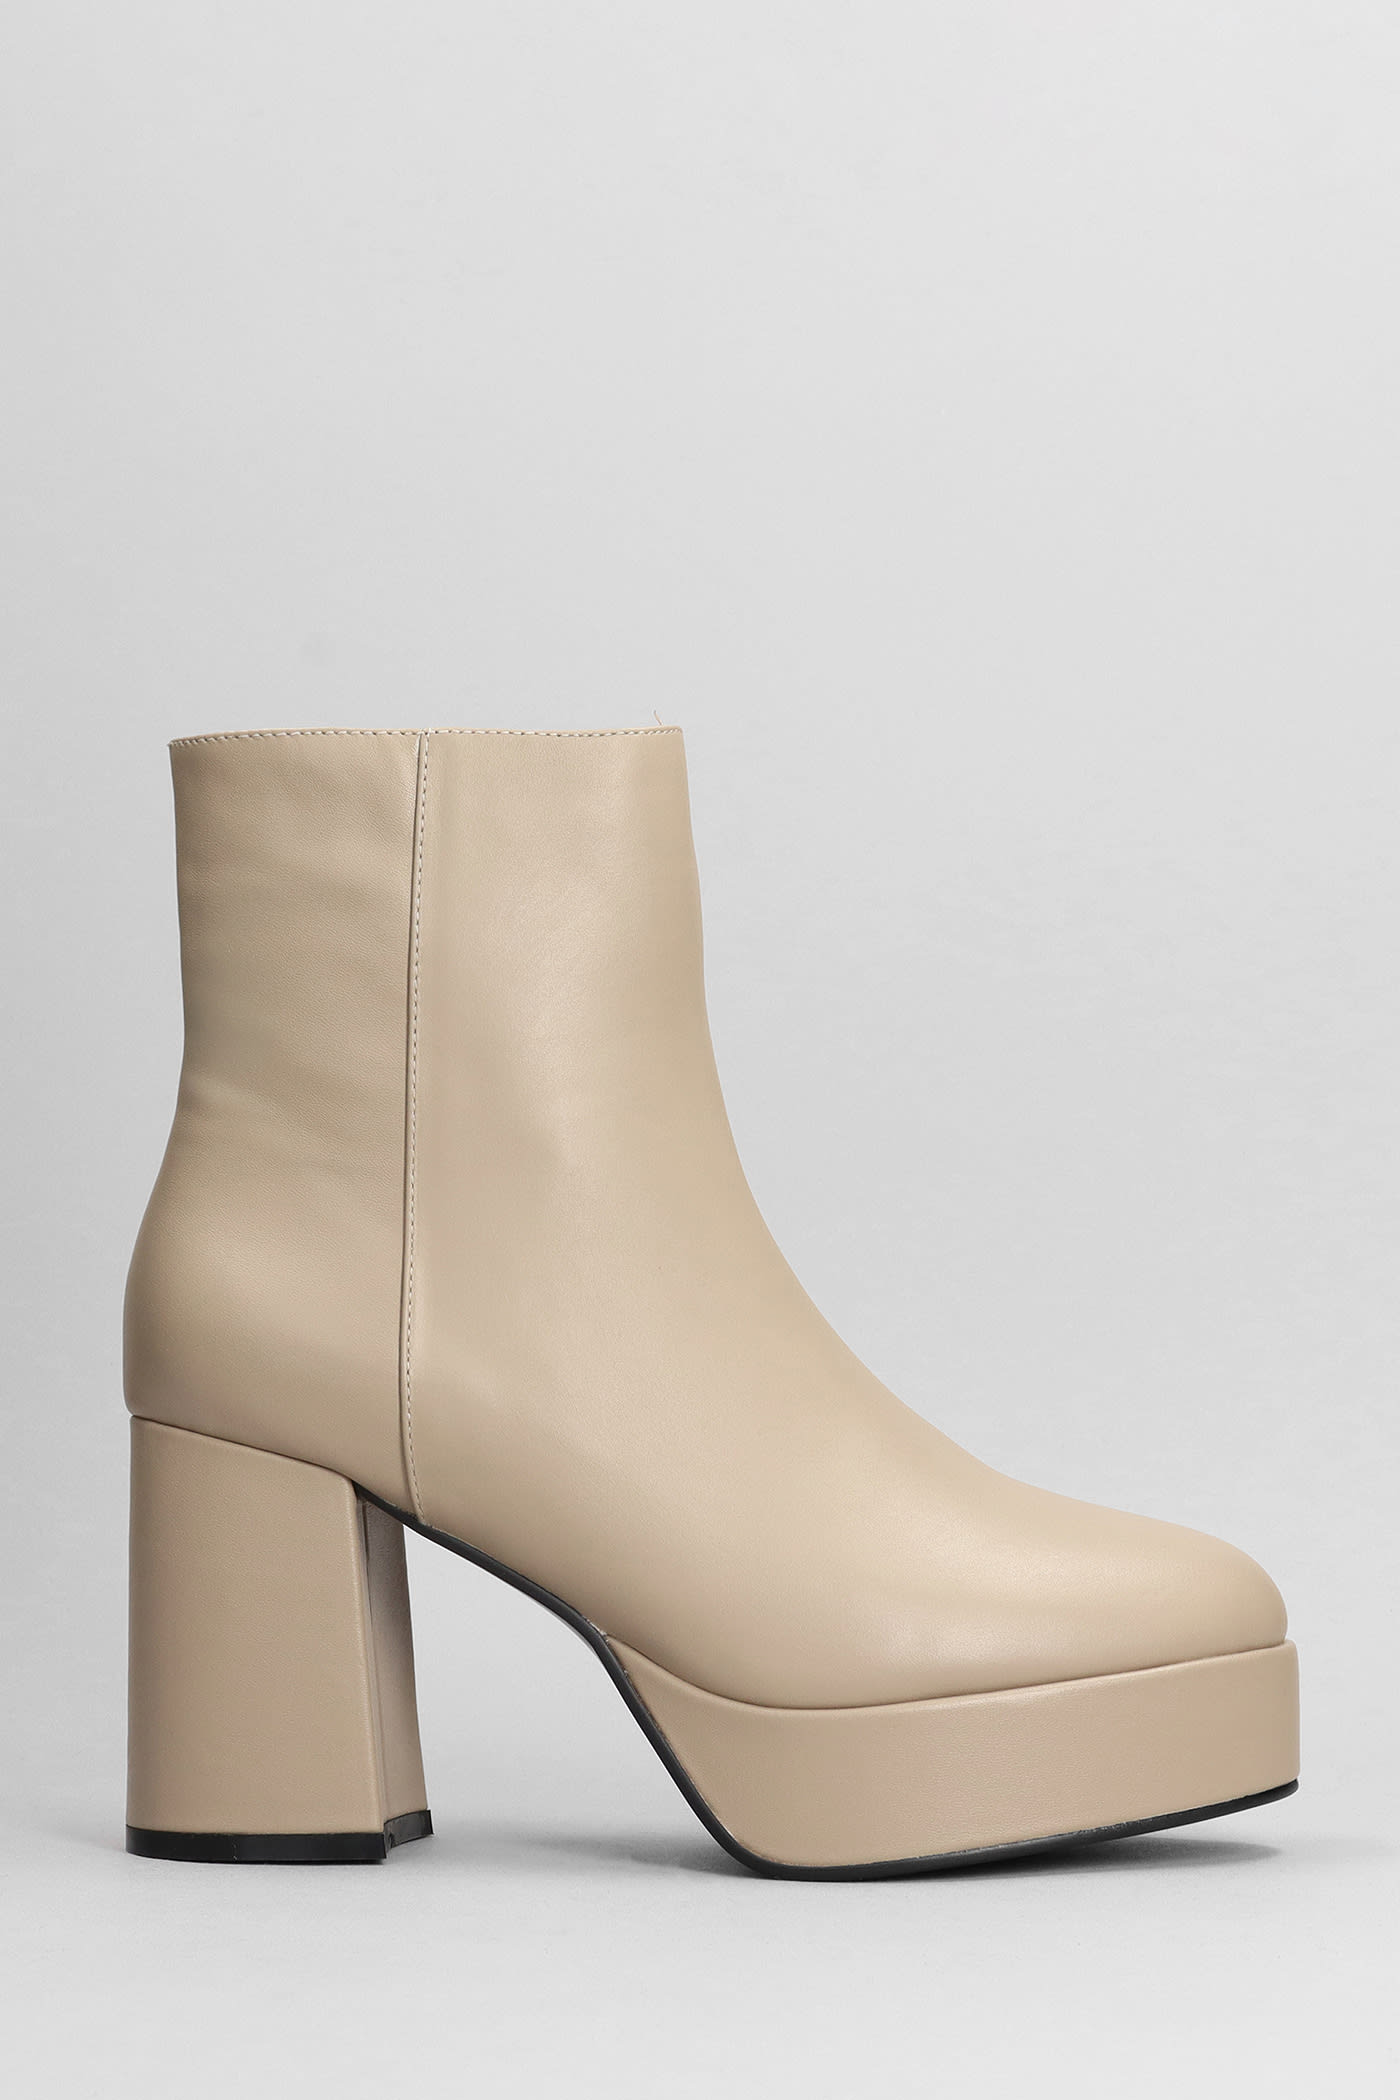 Bibi Lou High Heels Ankle Boots In Taupe Leather